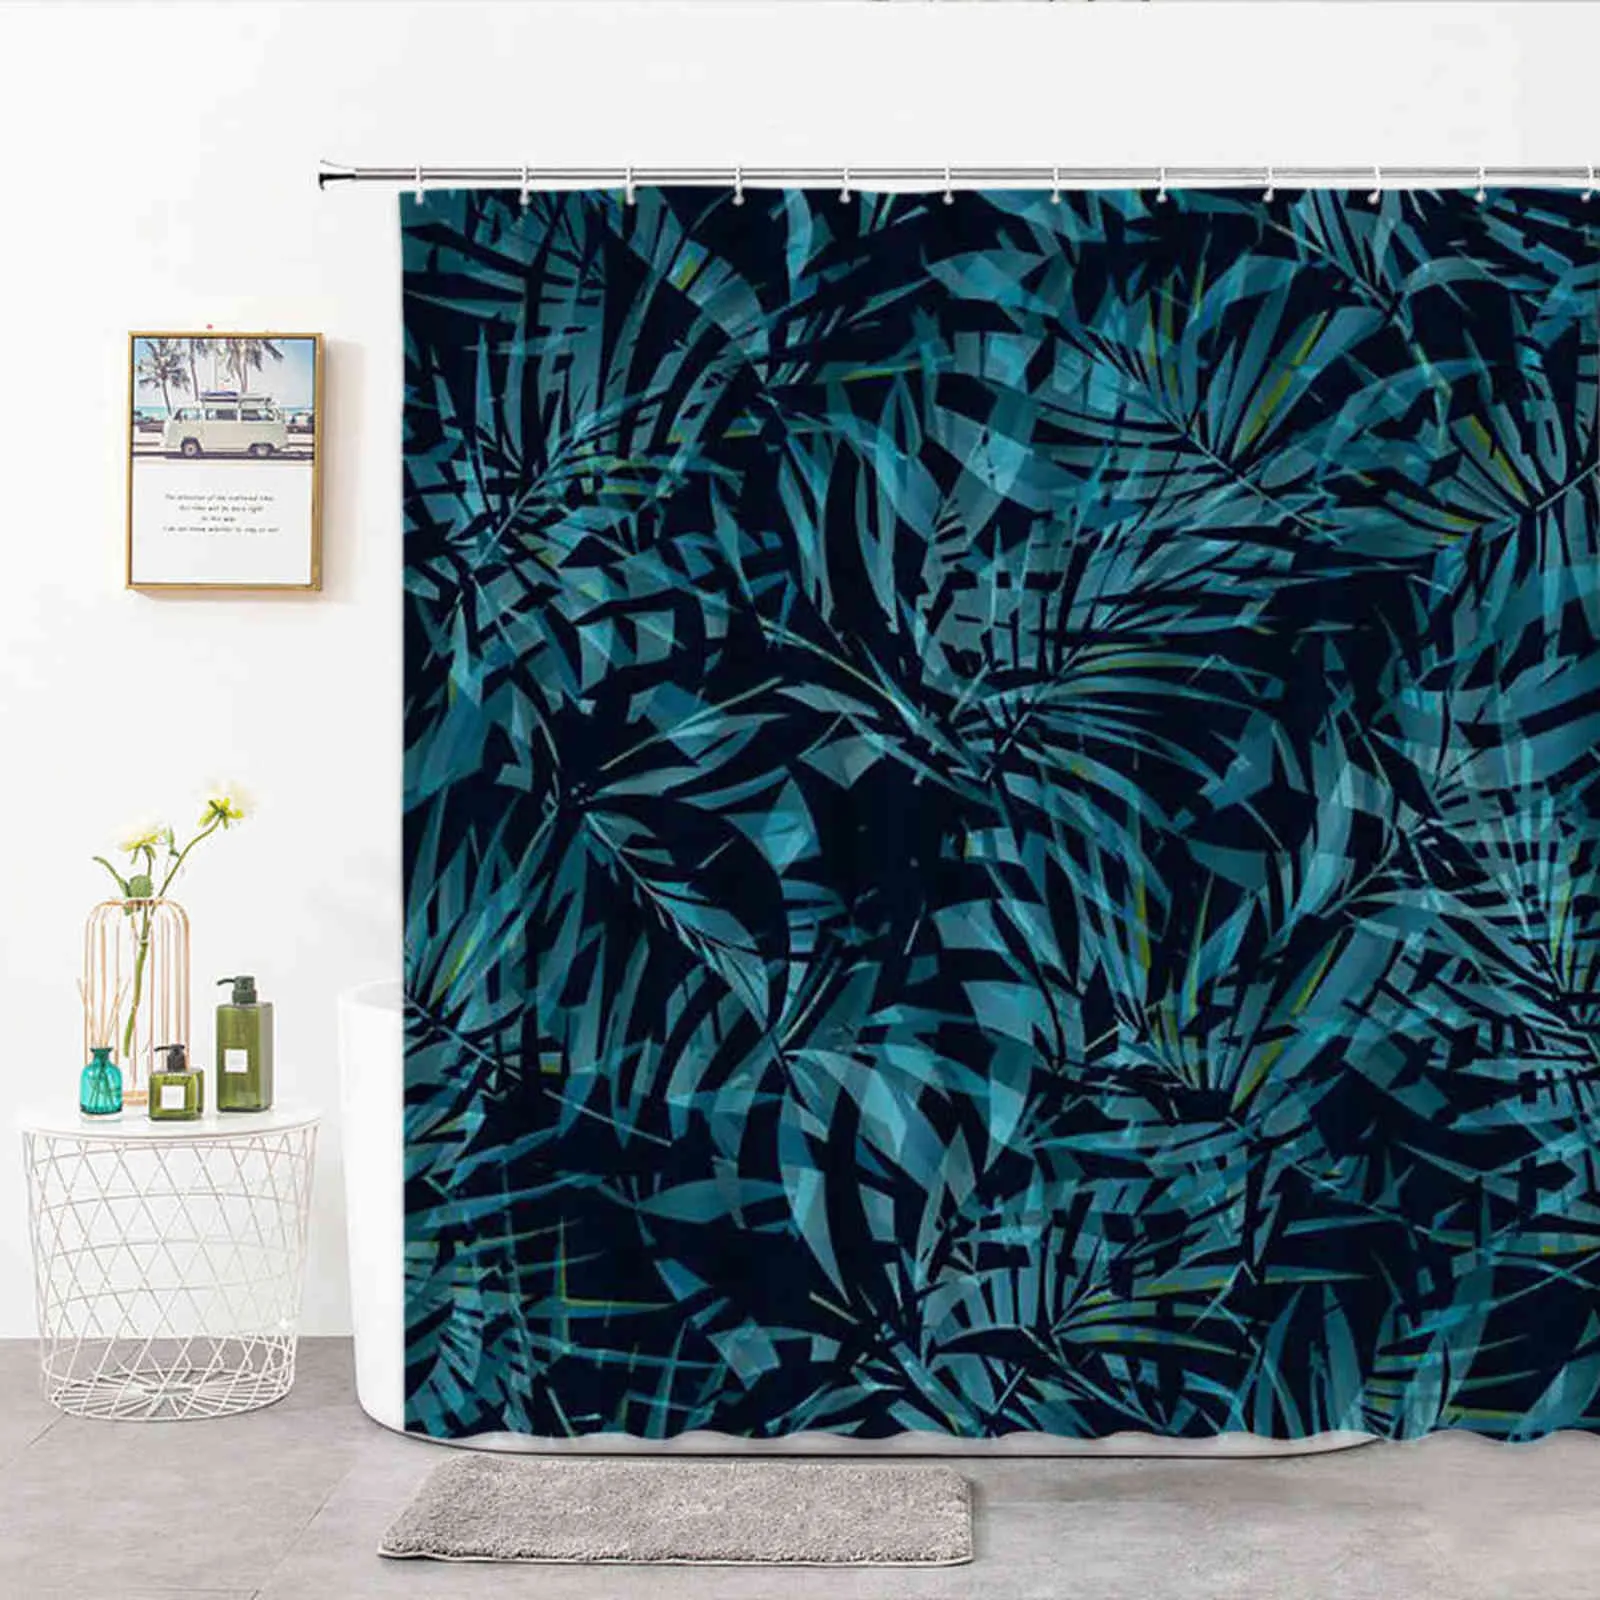 Plant Leaves Shower Curtains Black White Palm Leaf For Bathroom Decor Curtain Washable Fabric Customizable Size Bathroom Things 211116